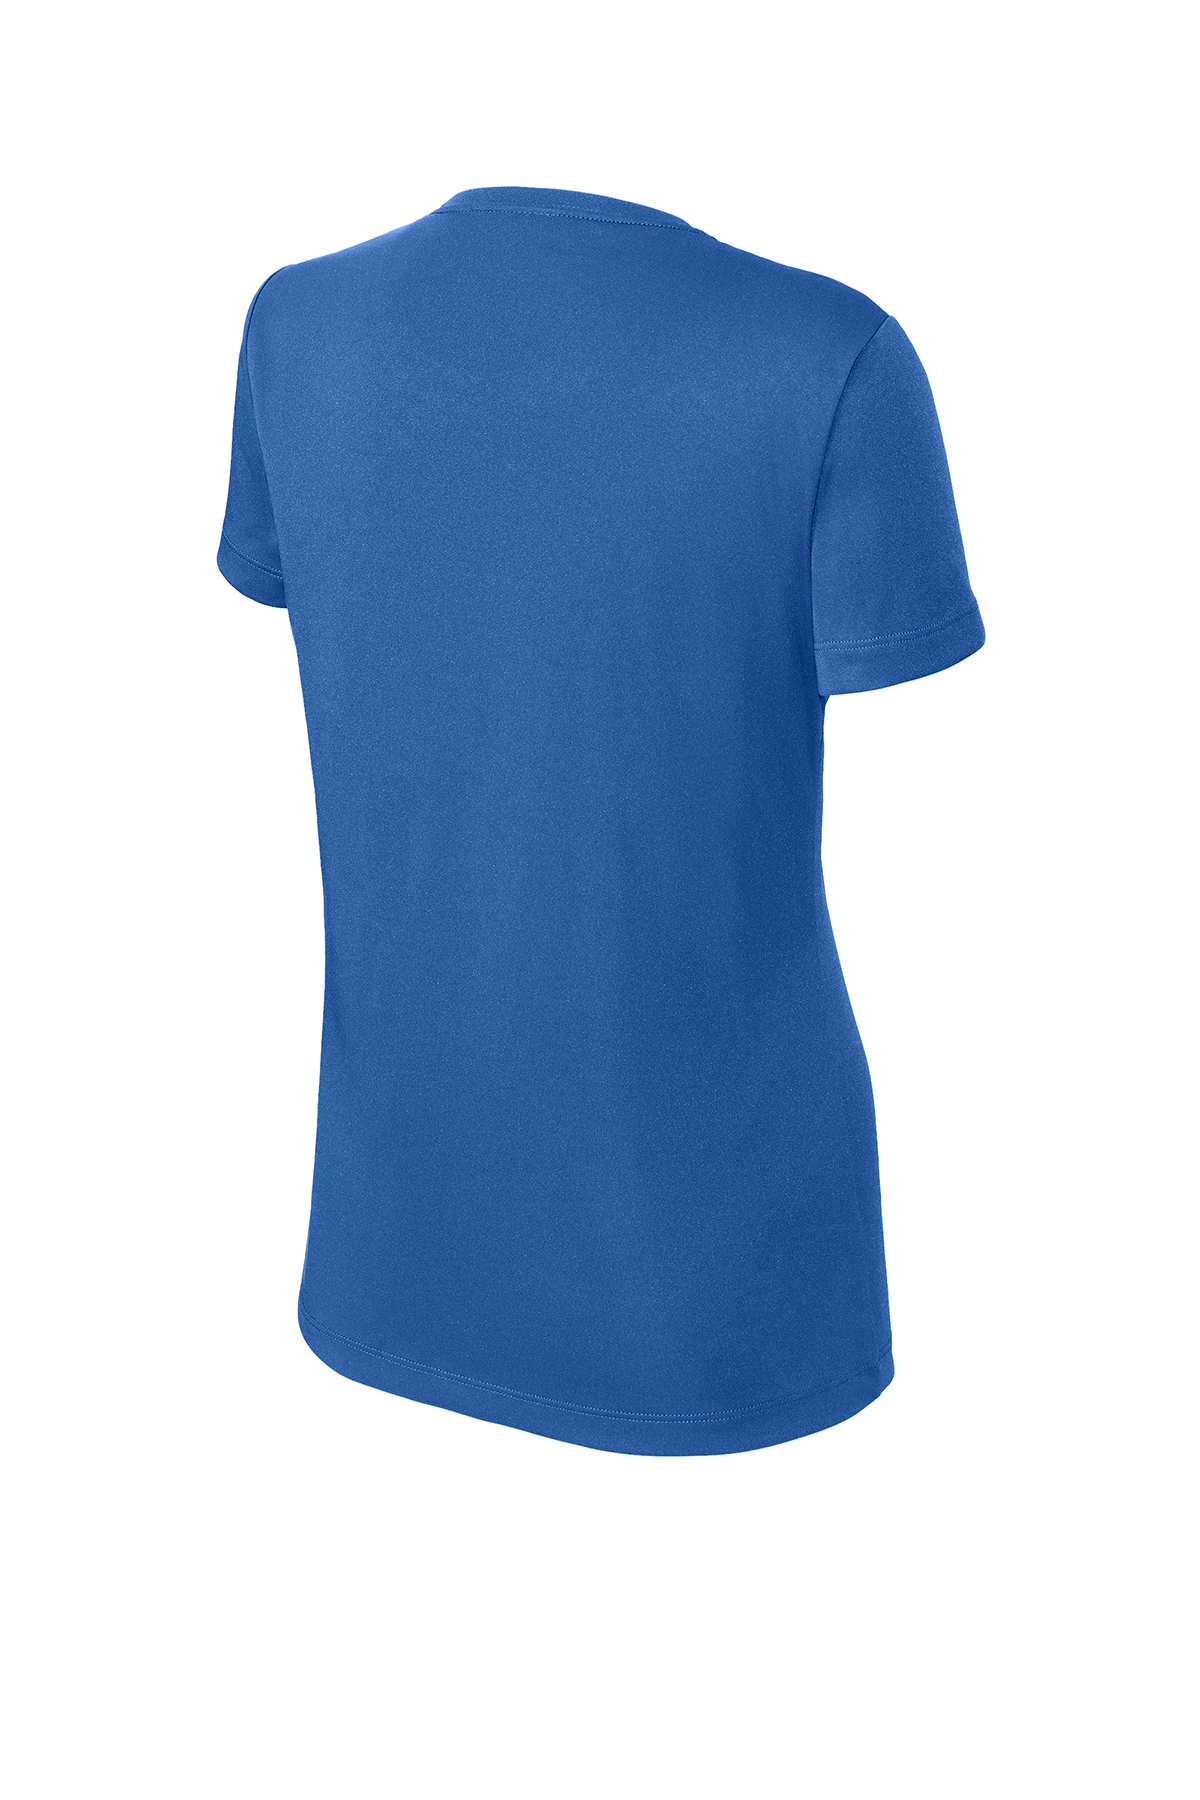 Sport-Tek Ladies PosiCharge Competitor™ Tee | Product | Company Casuals